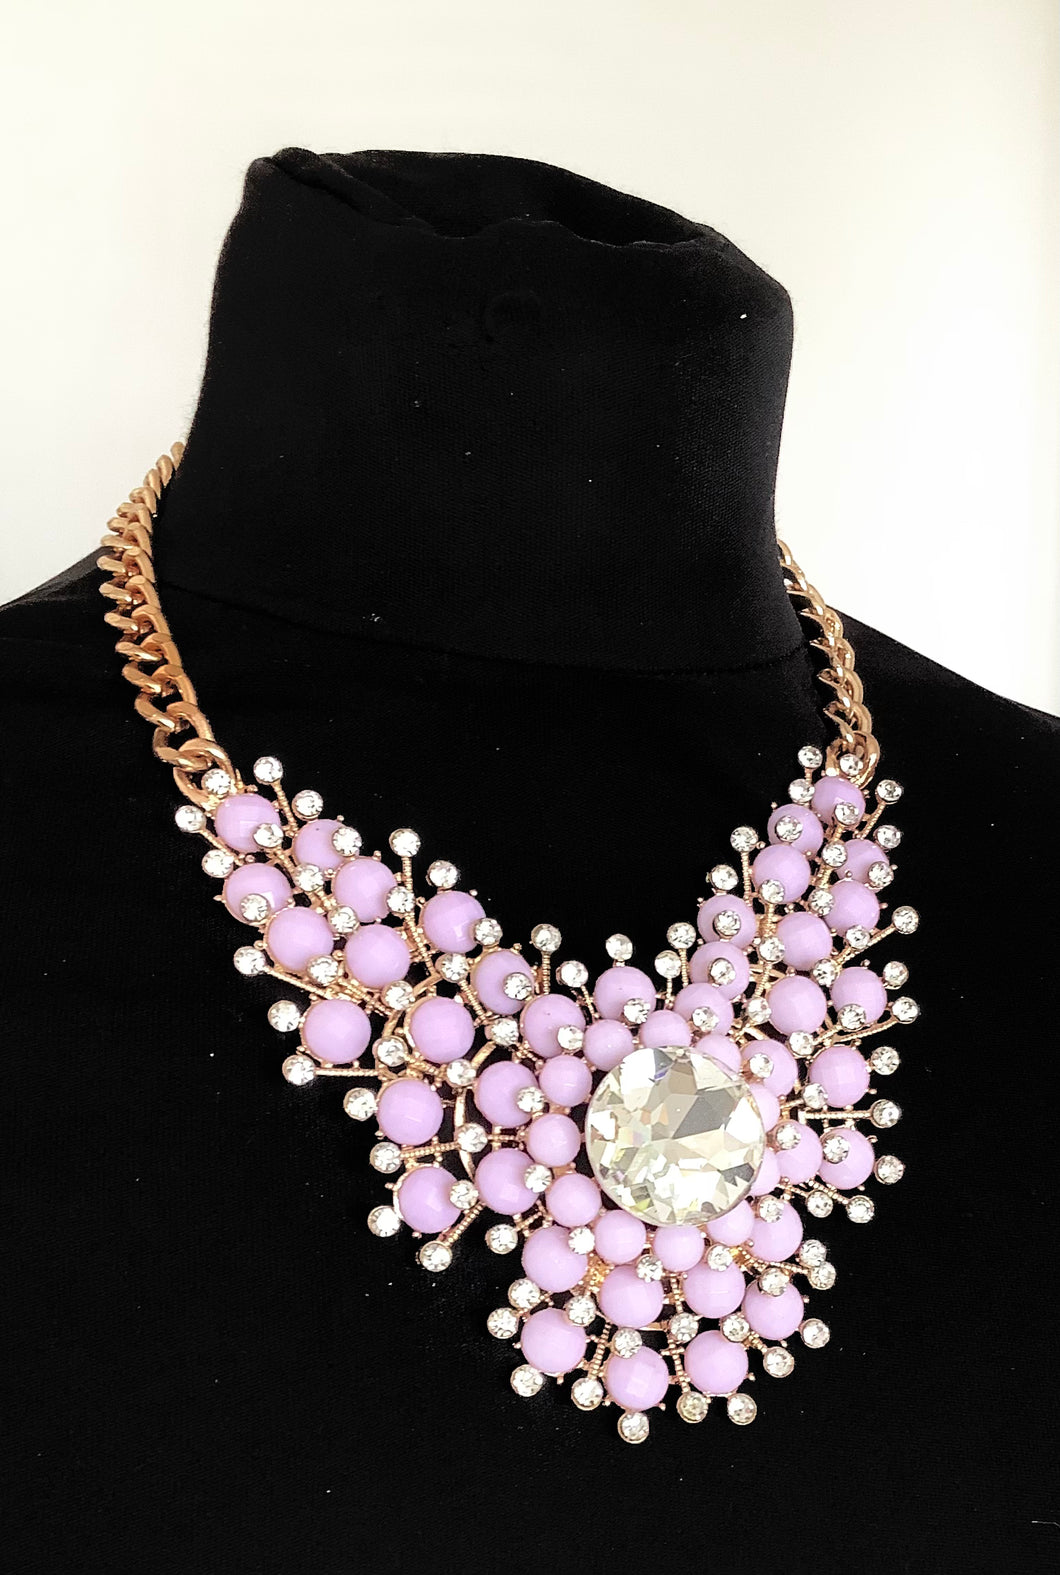 Lilac Jewelled Statement Necklace